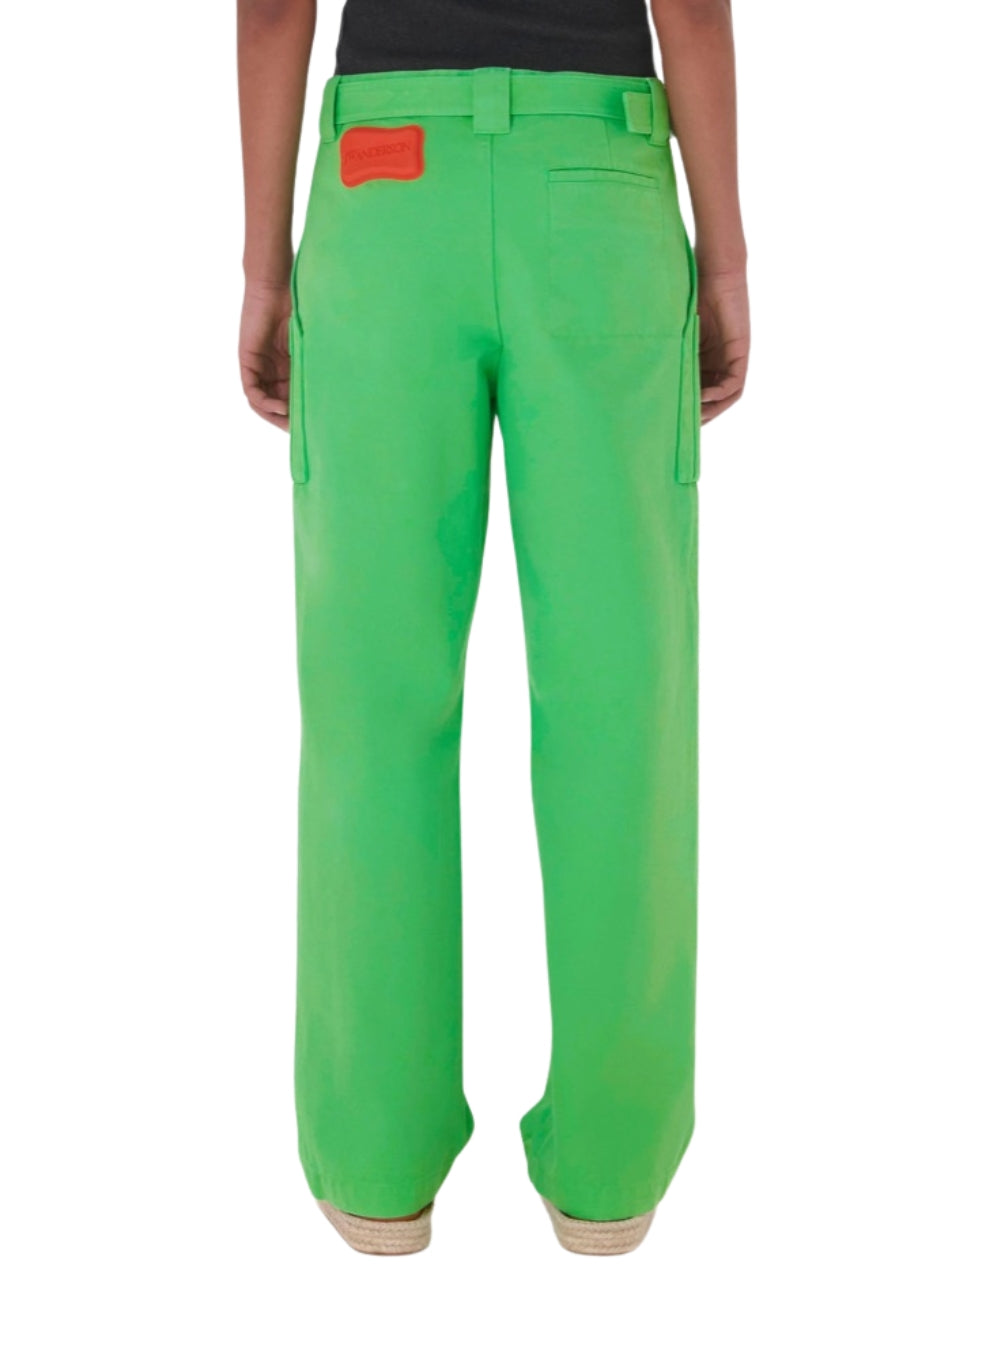 J.W. ANDERSON | Dyed Cargo Trousers